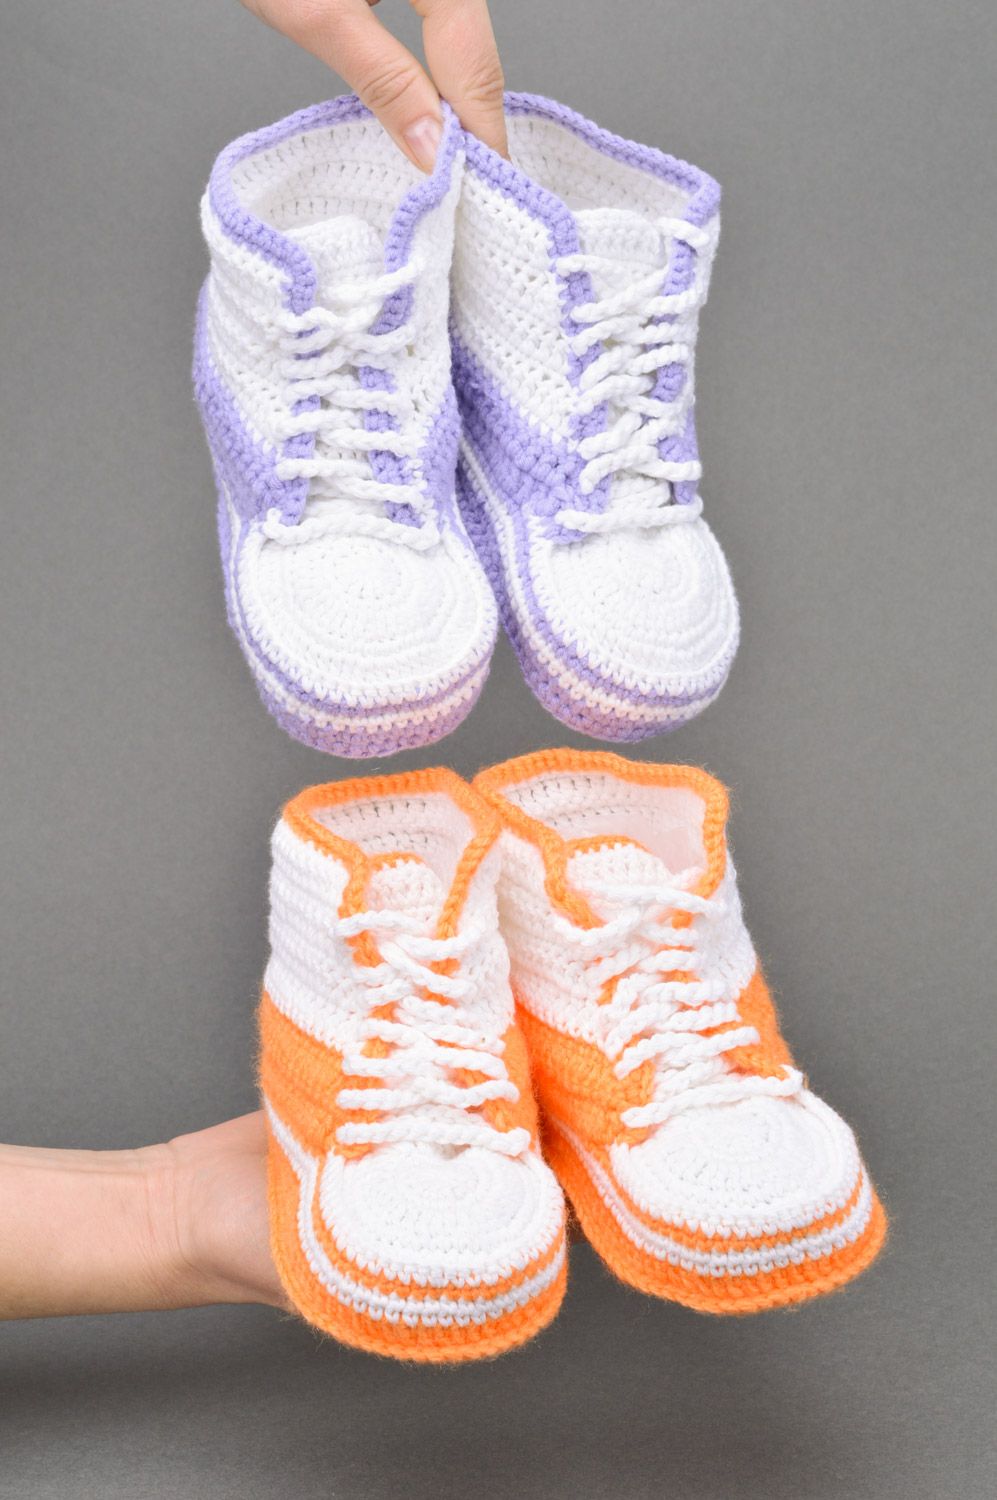 Handmade crocheted baby booties set of 2 pairs in orange and purple colors photo 3